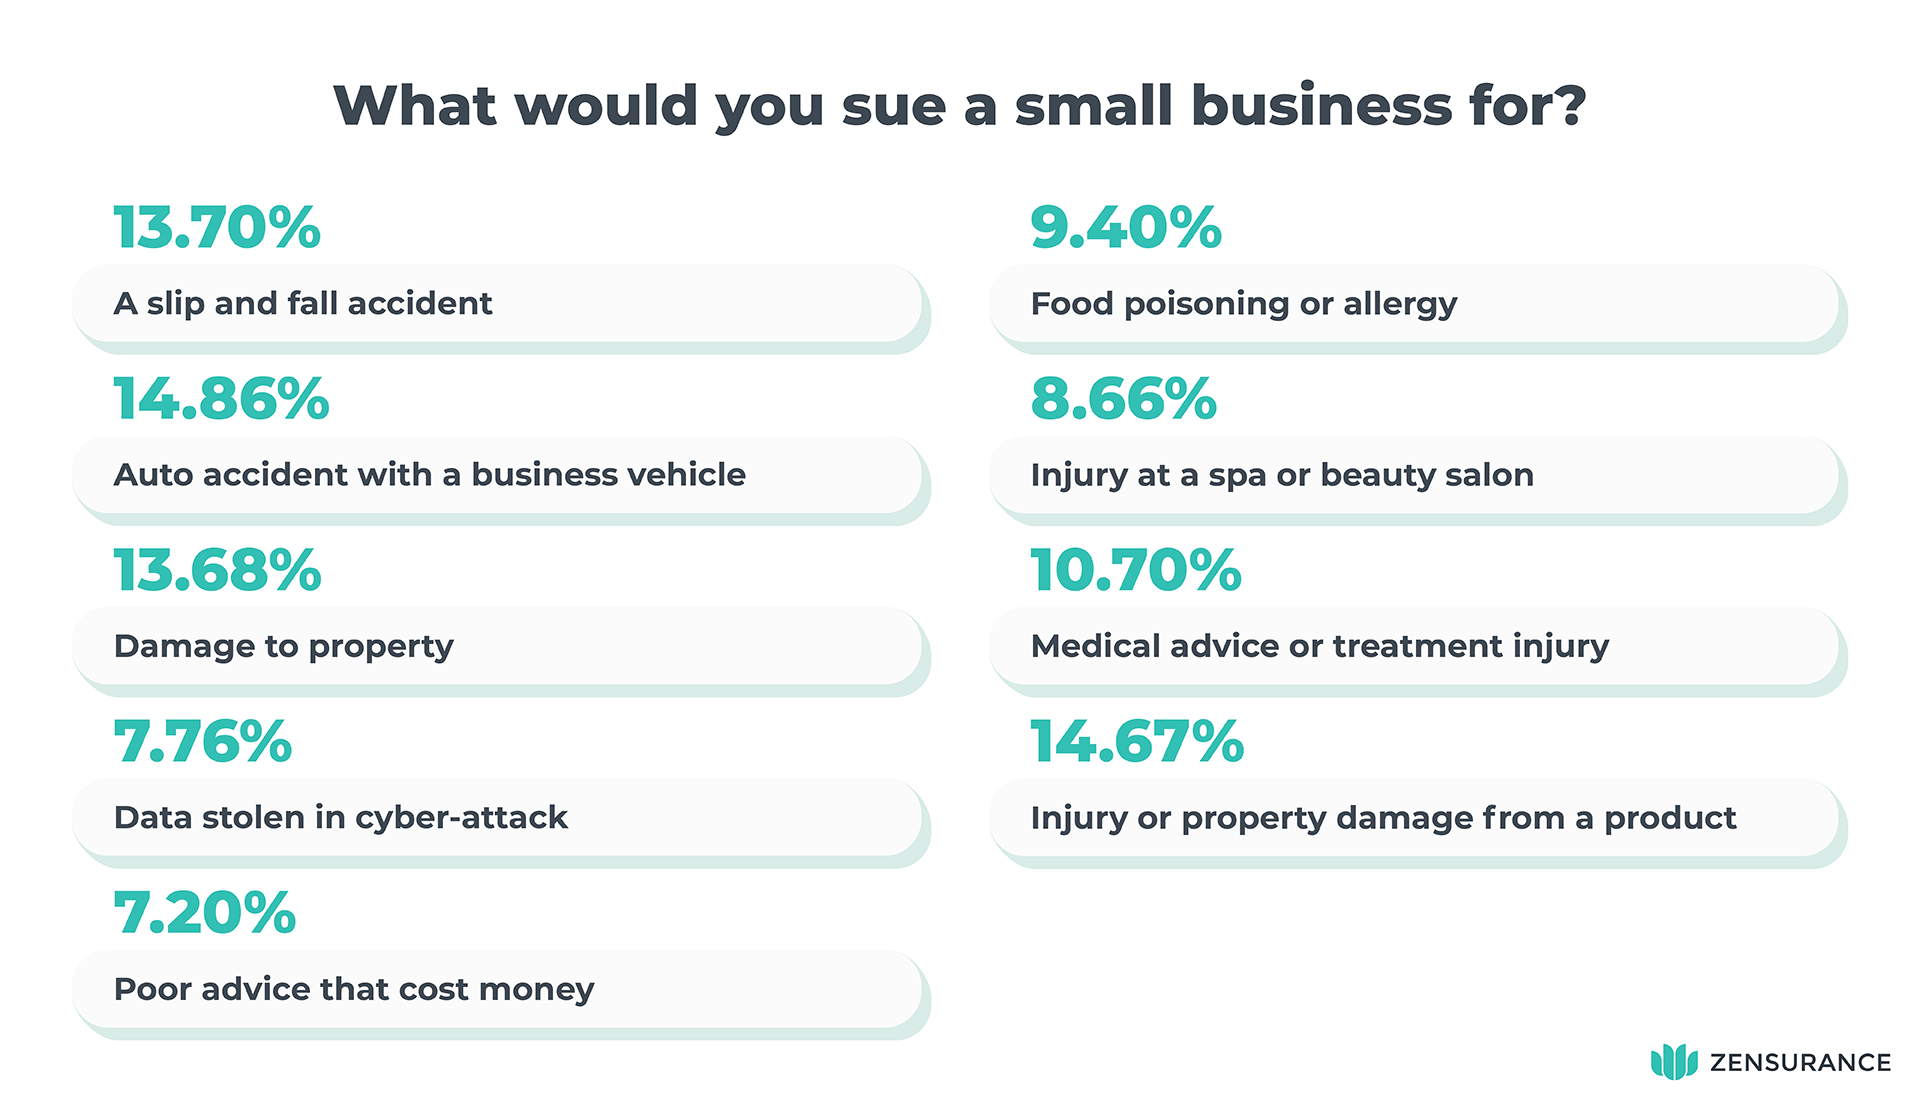 Survey results - Reasons to sue a business